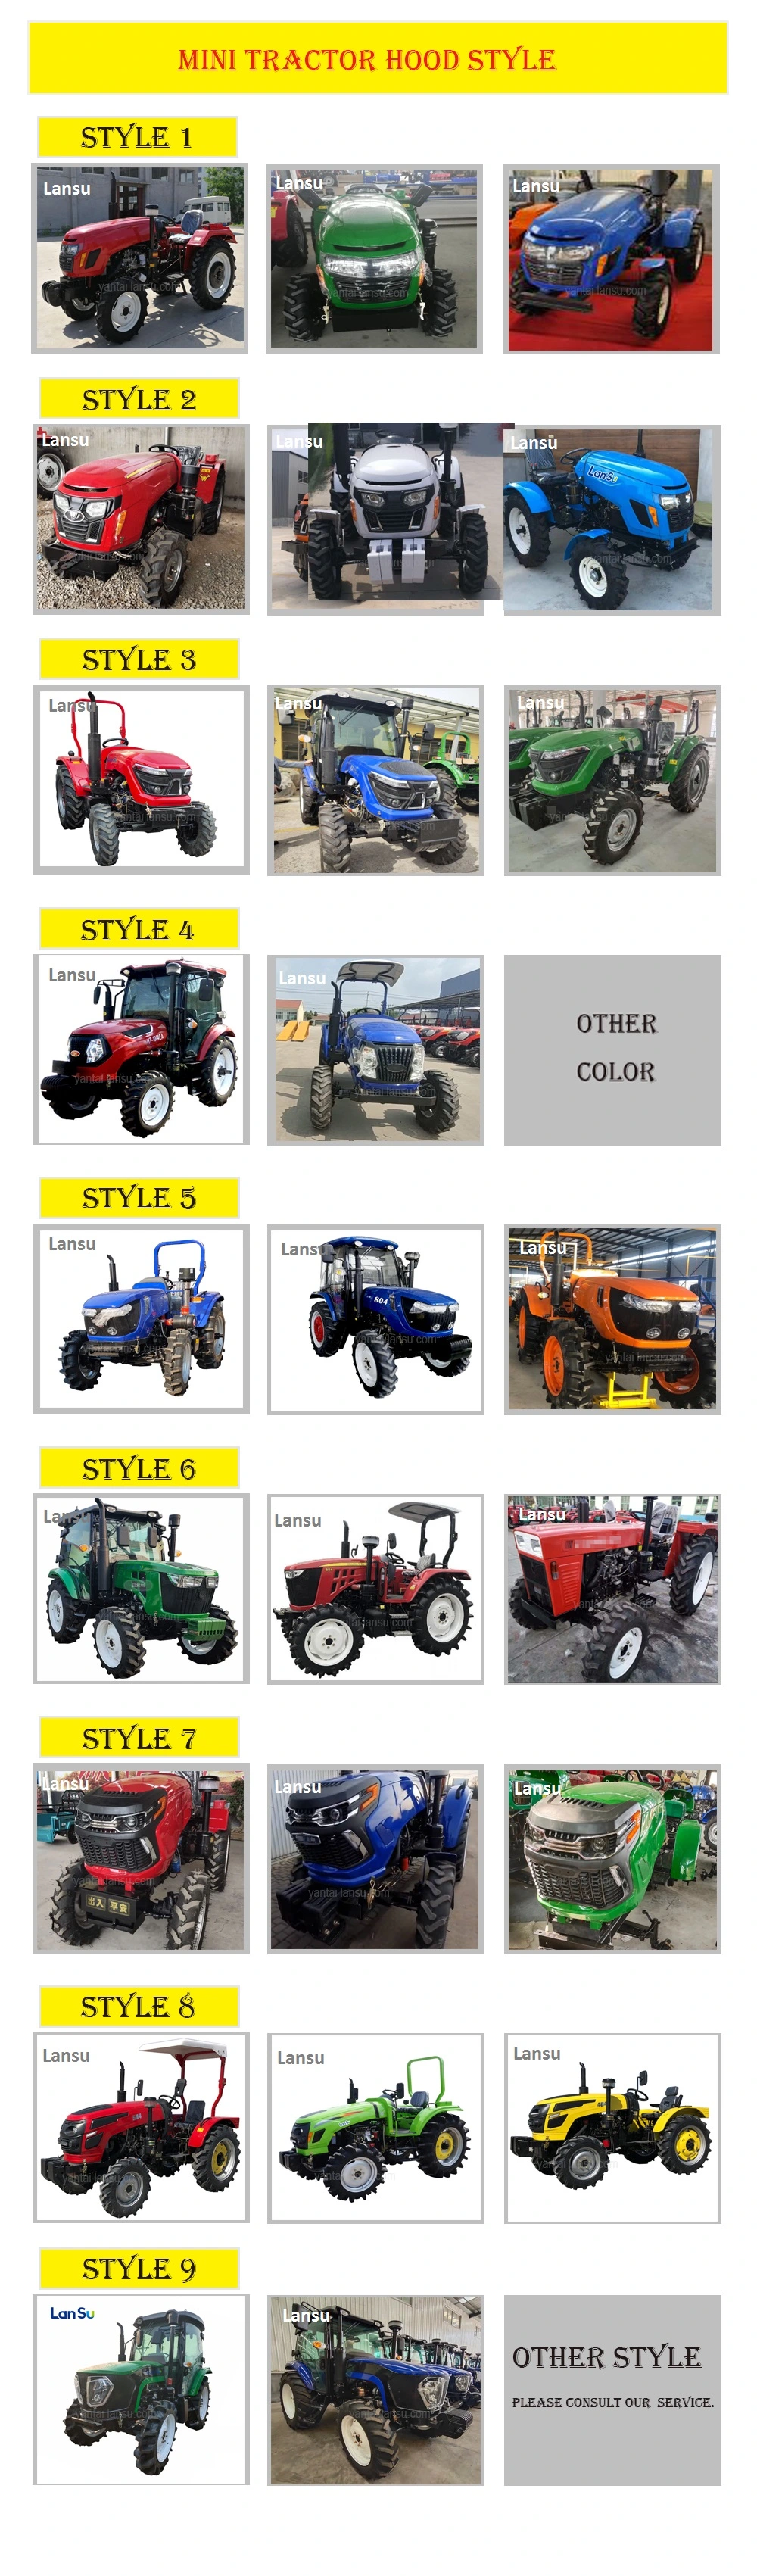 China Agricultural Machinery Manufacturer 40HP 4X4 4WD Small Compact Garden Cheap Wheel Mini Farm Tractor